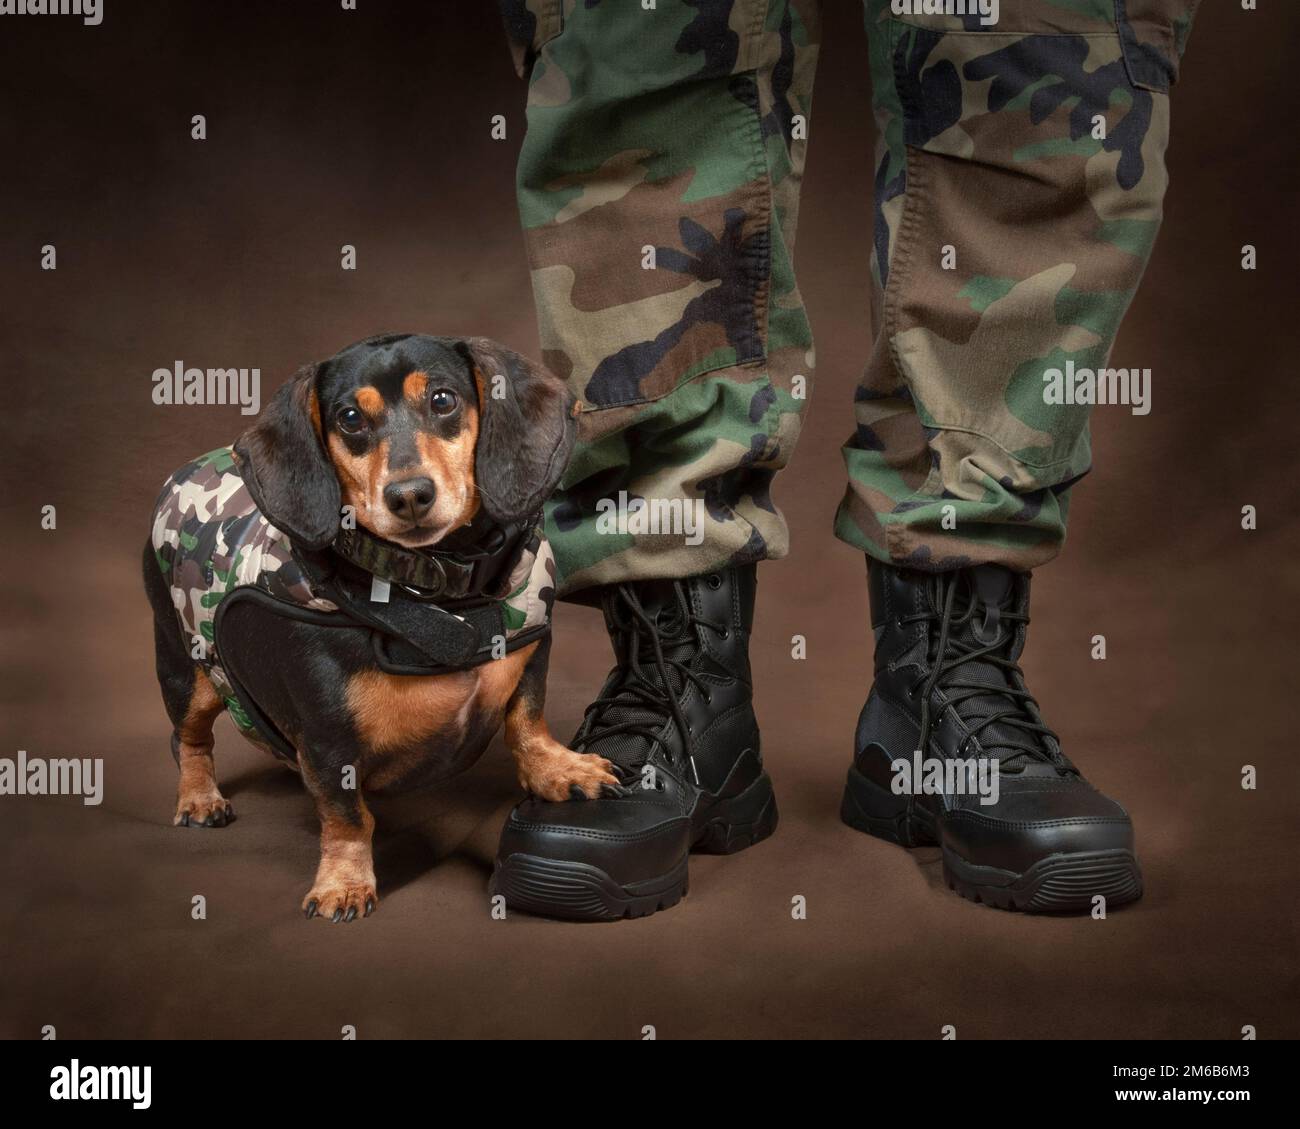 A cute mini dachshund dressed in camo stands next to the feet and legs of a mannequin soldier.  The dog has one of his feet on the 'soldier's' boot. Stock Photo